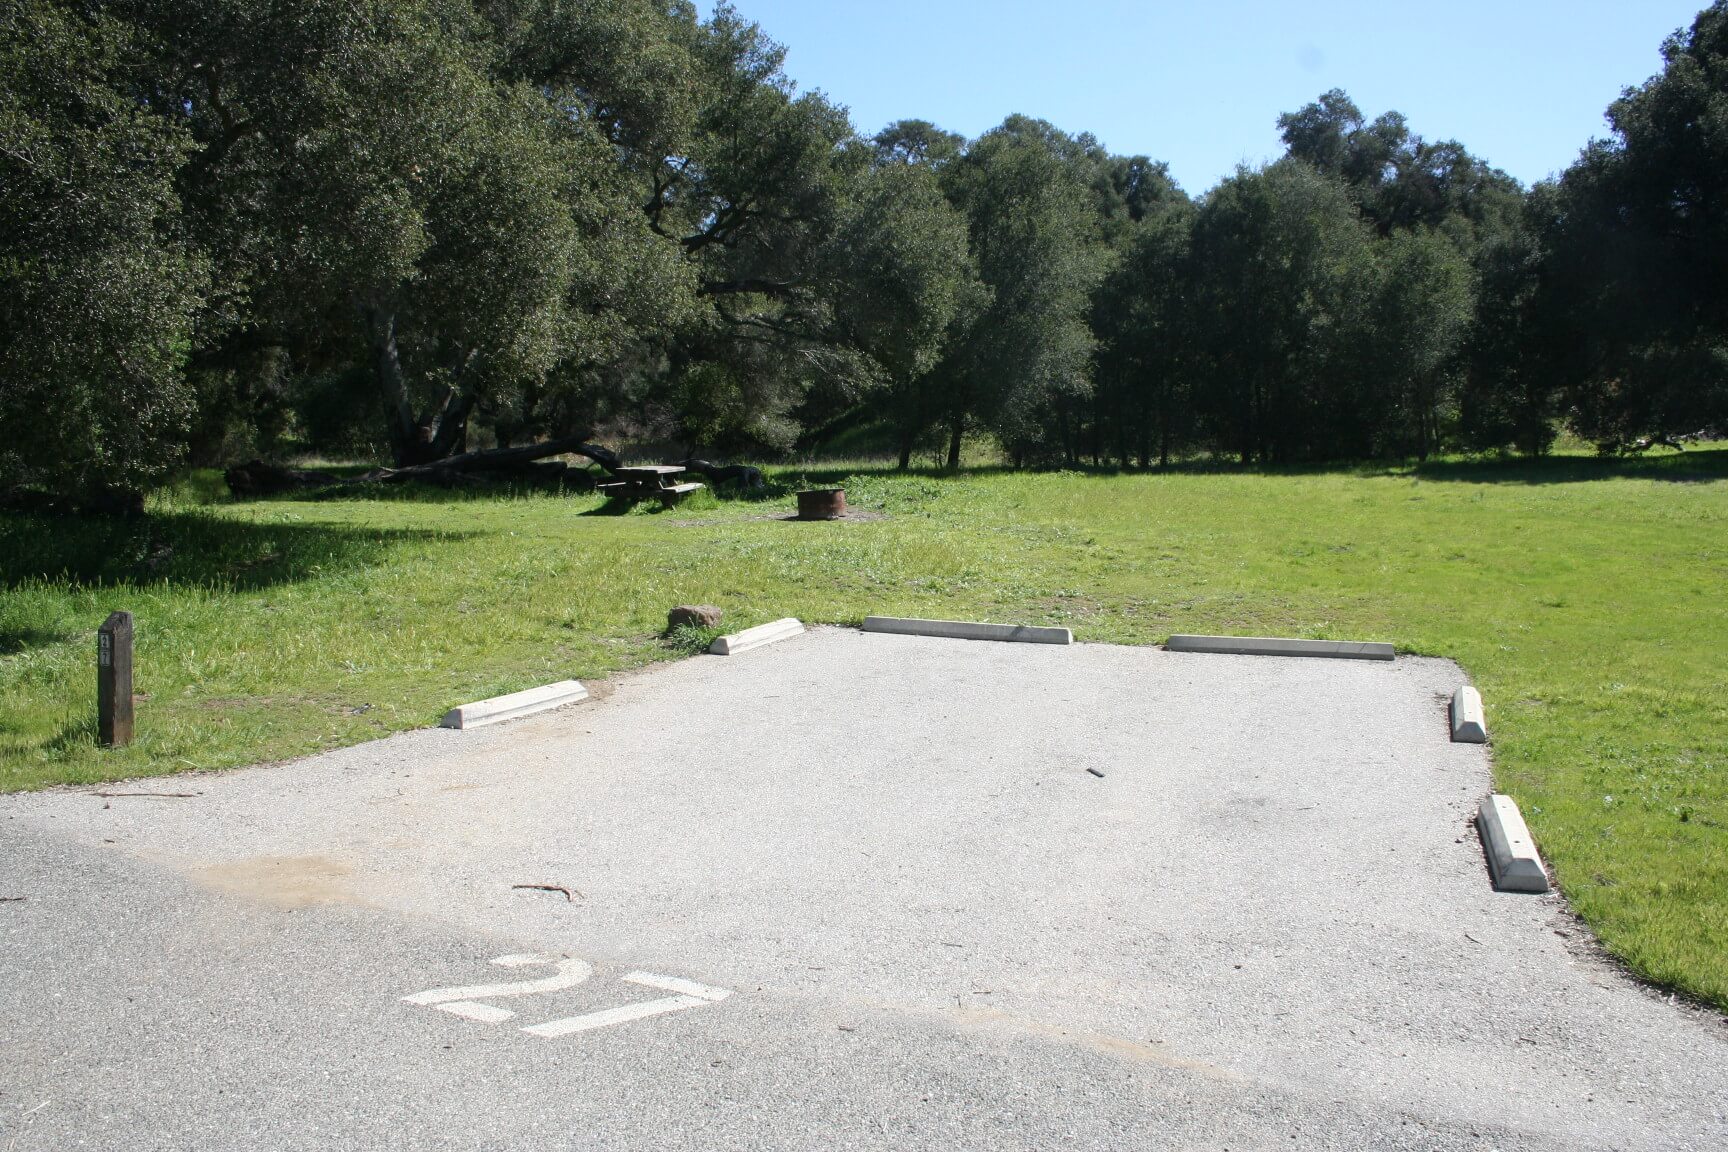 Leo Carrillo & Malibu Creek Campgrounds Are Now Open For Camping - Malibu Creek #27 Before Fire